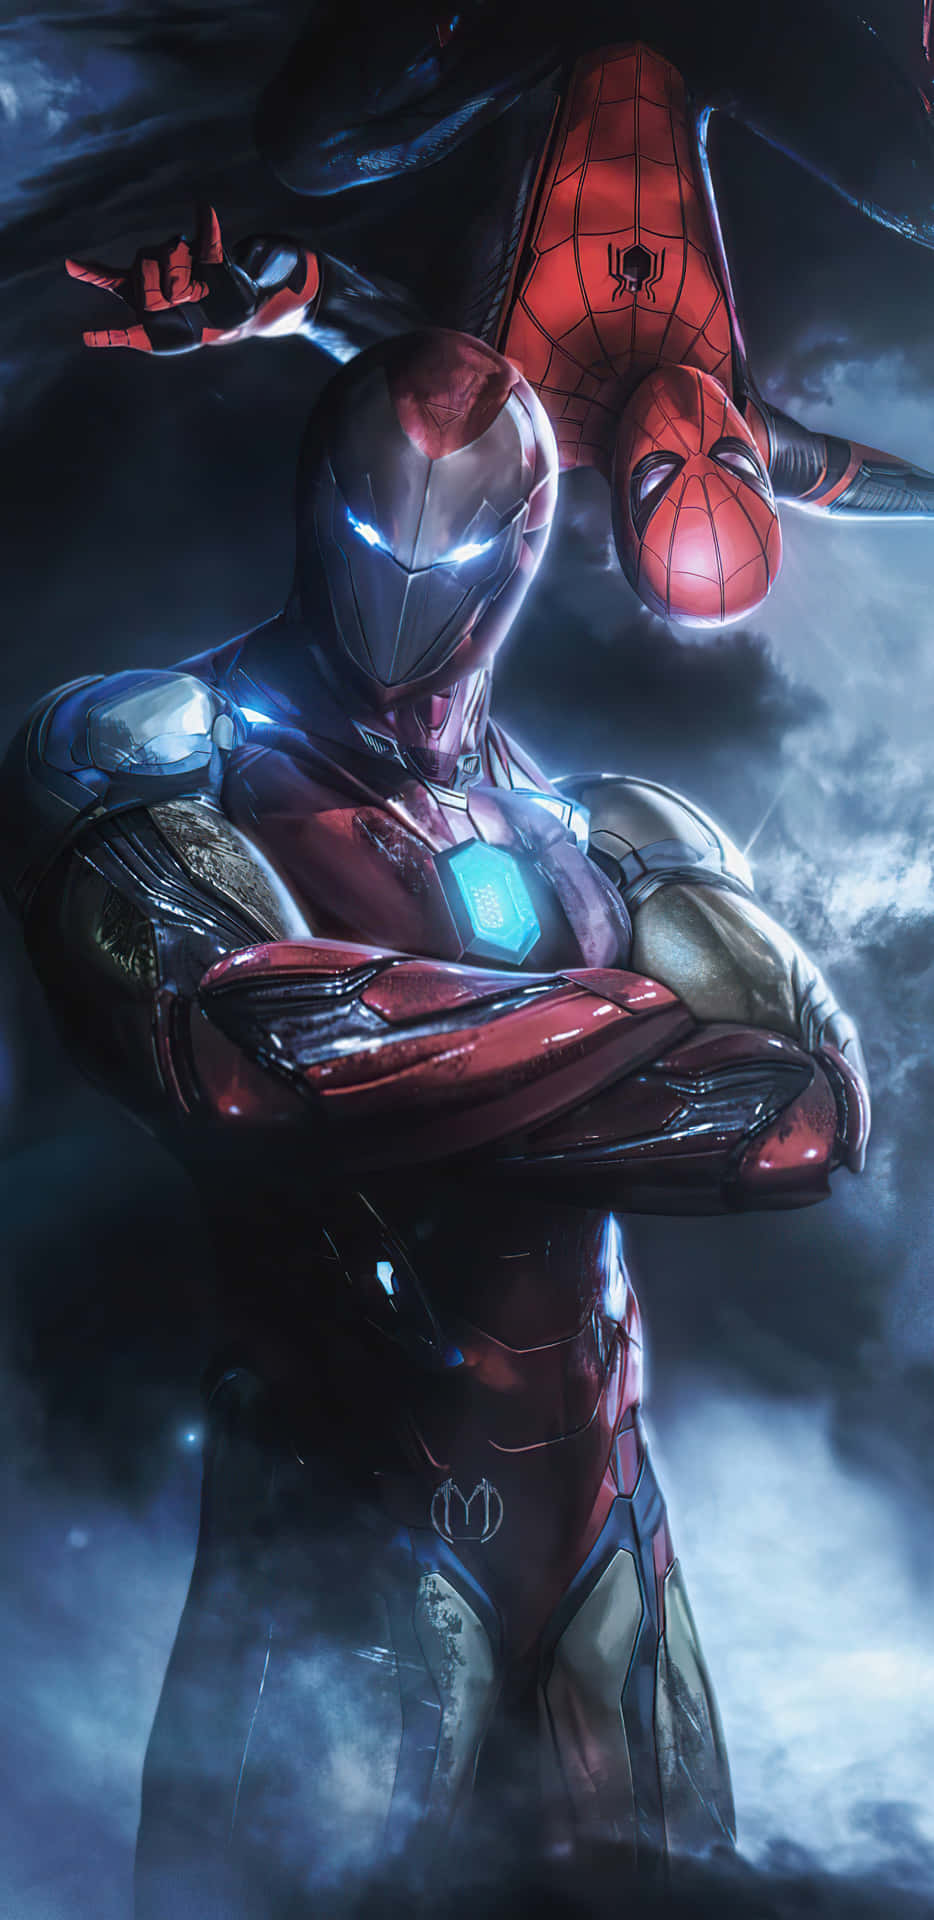 Marvel heroes Spider-Man and Iron Man join forces Wallpaper